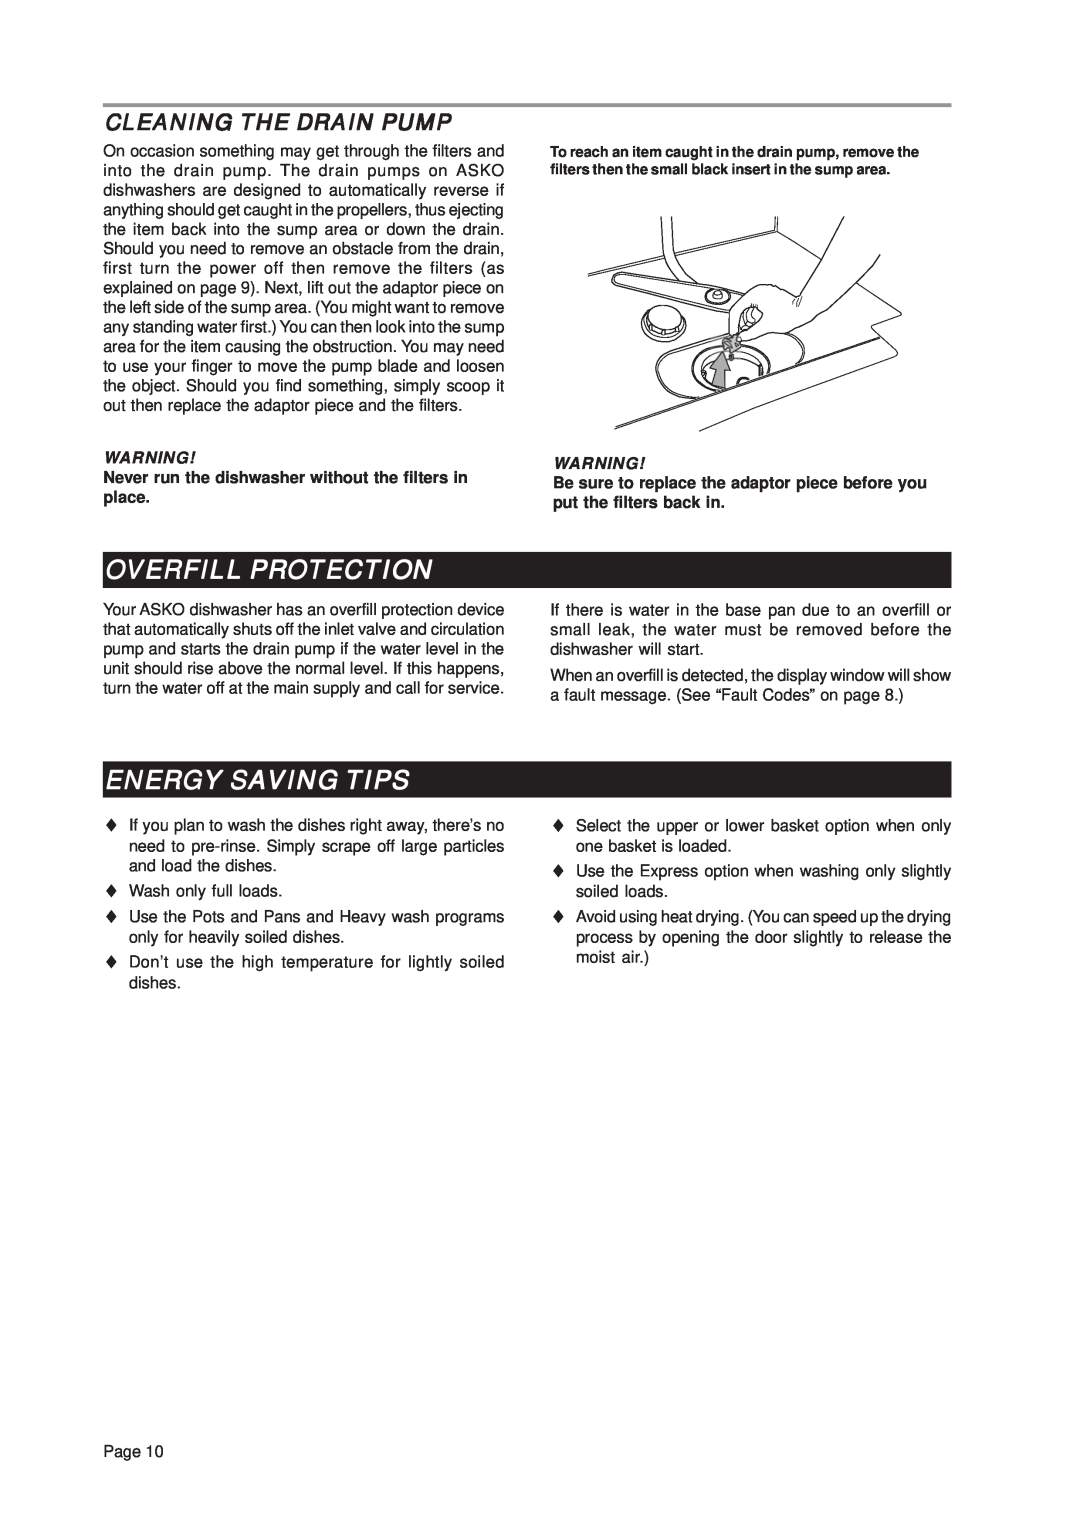 Asko D3331 important safety instructions Overfill Protection, Energy Saving Tips, Cleaning The Drain Pump 